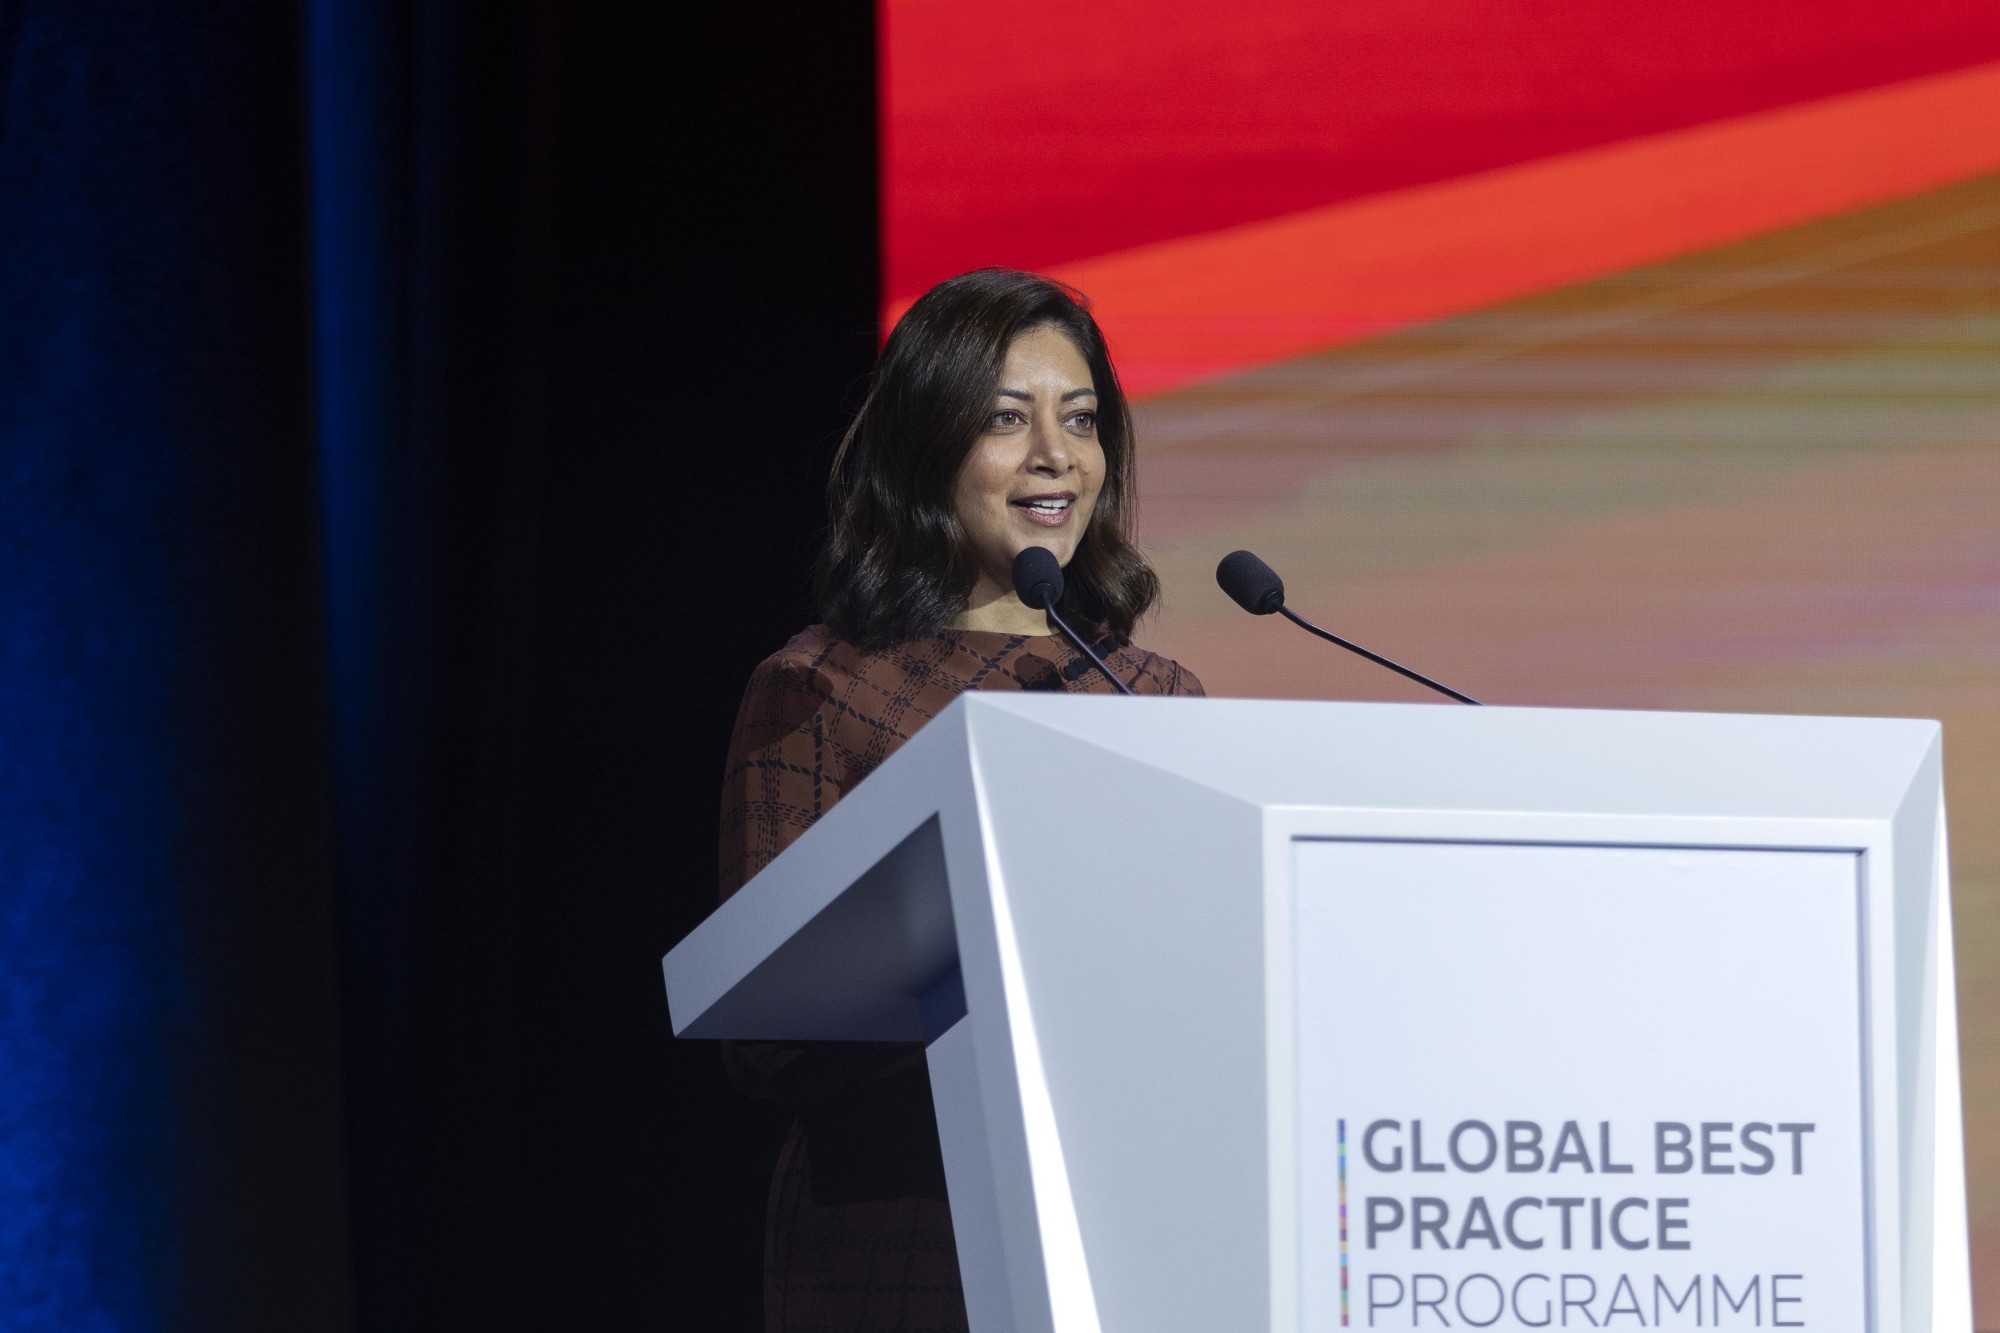 Nadia Verjee, Chief of Staff & Chief of Programme for People and Planet Expo 2020 Dubai speaks during the Global Best Practice Programme Assembly at Dubai Exhibition Centre m35186